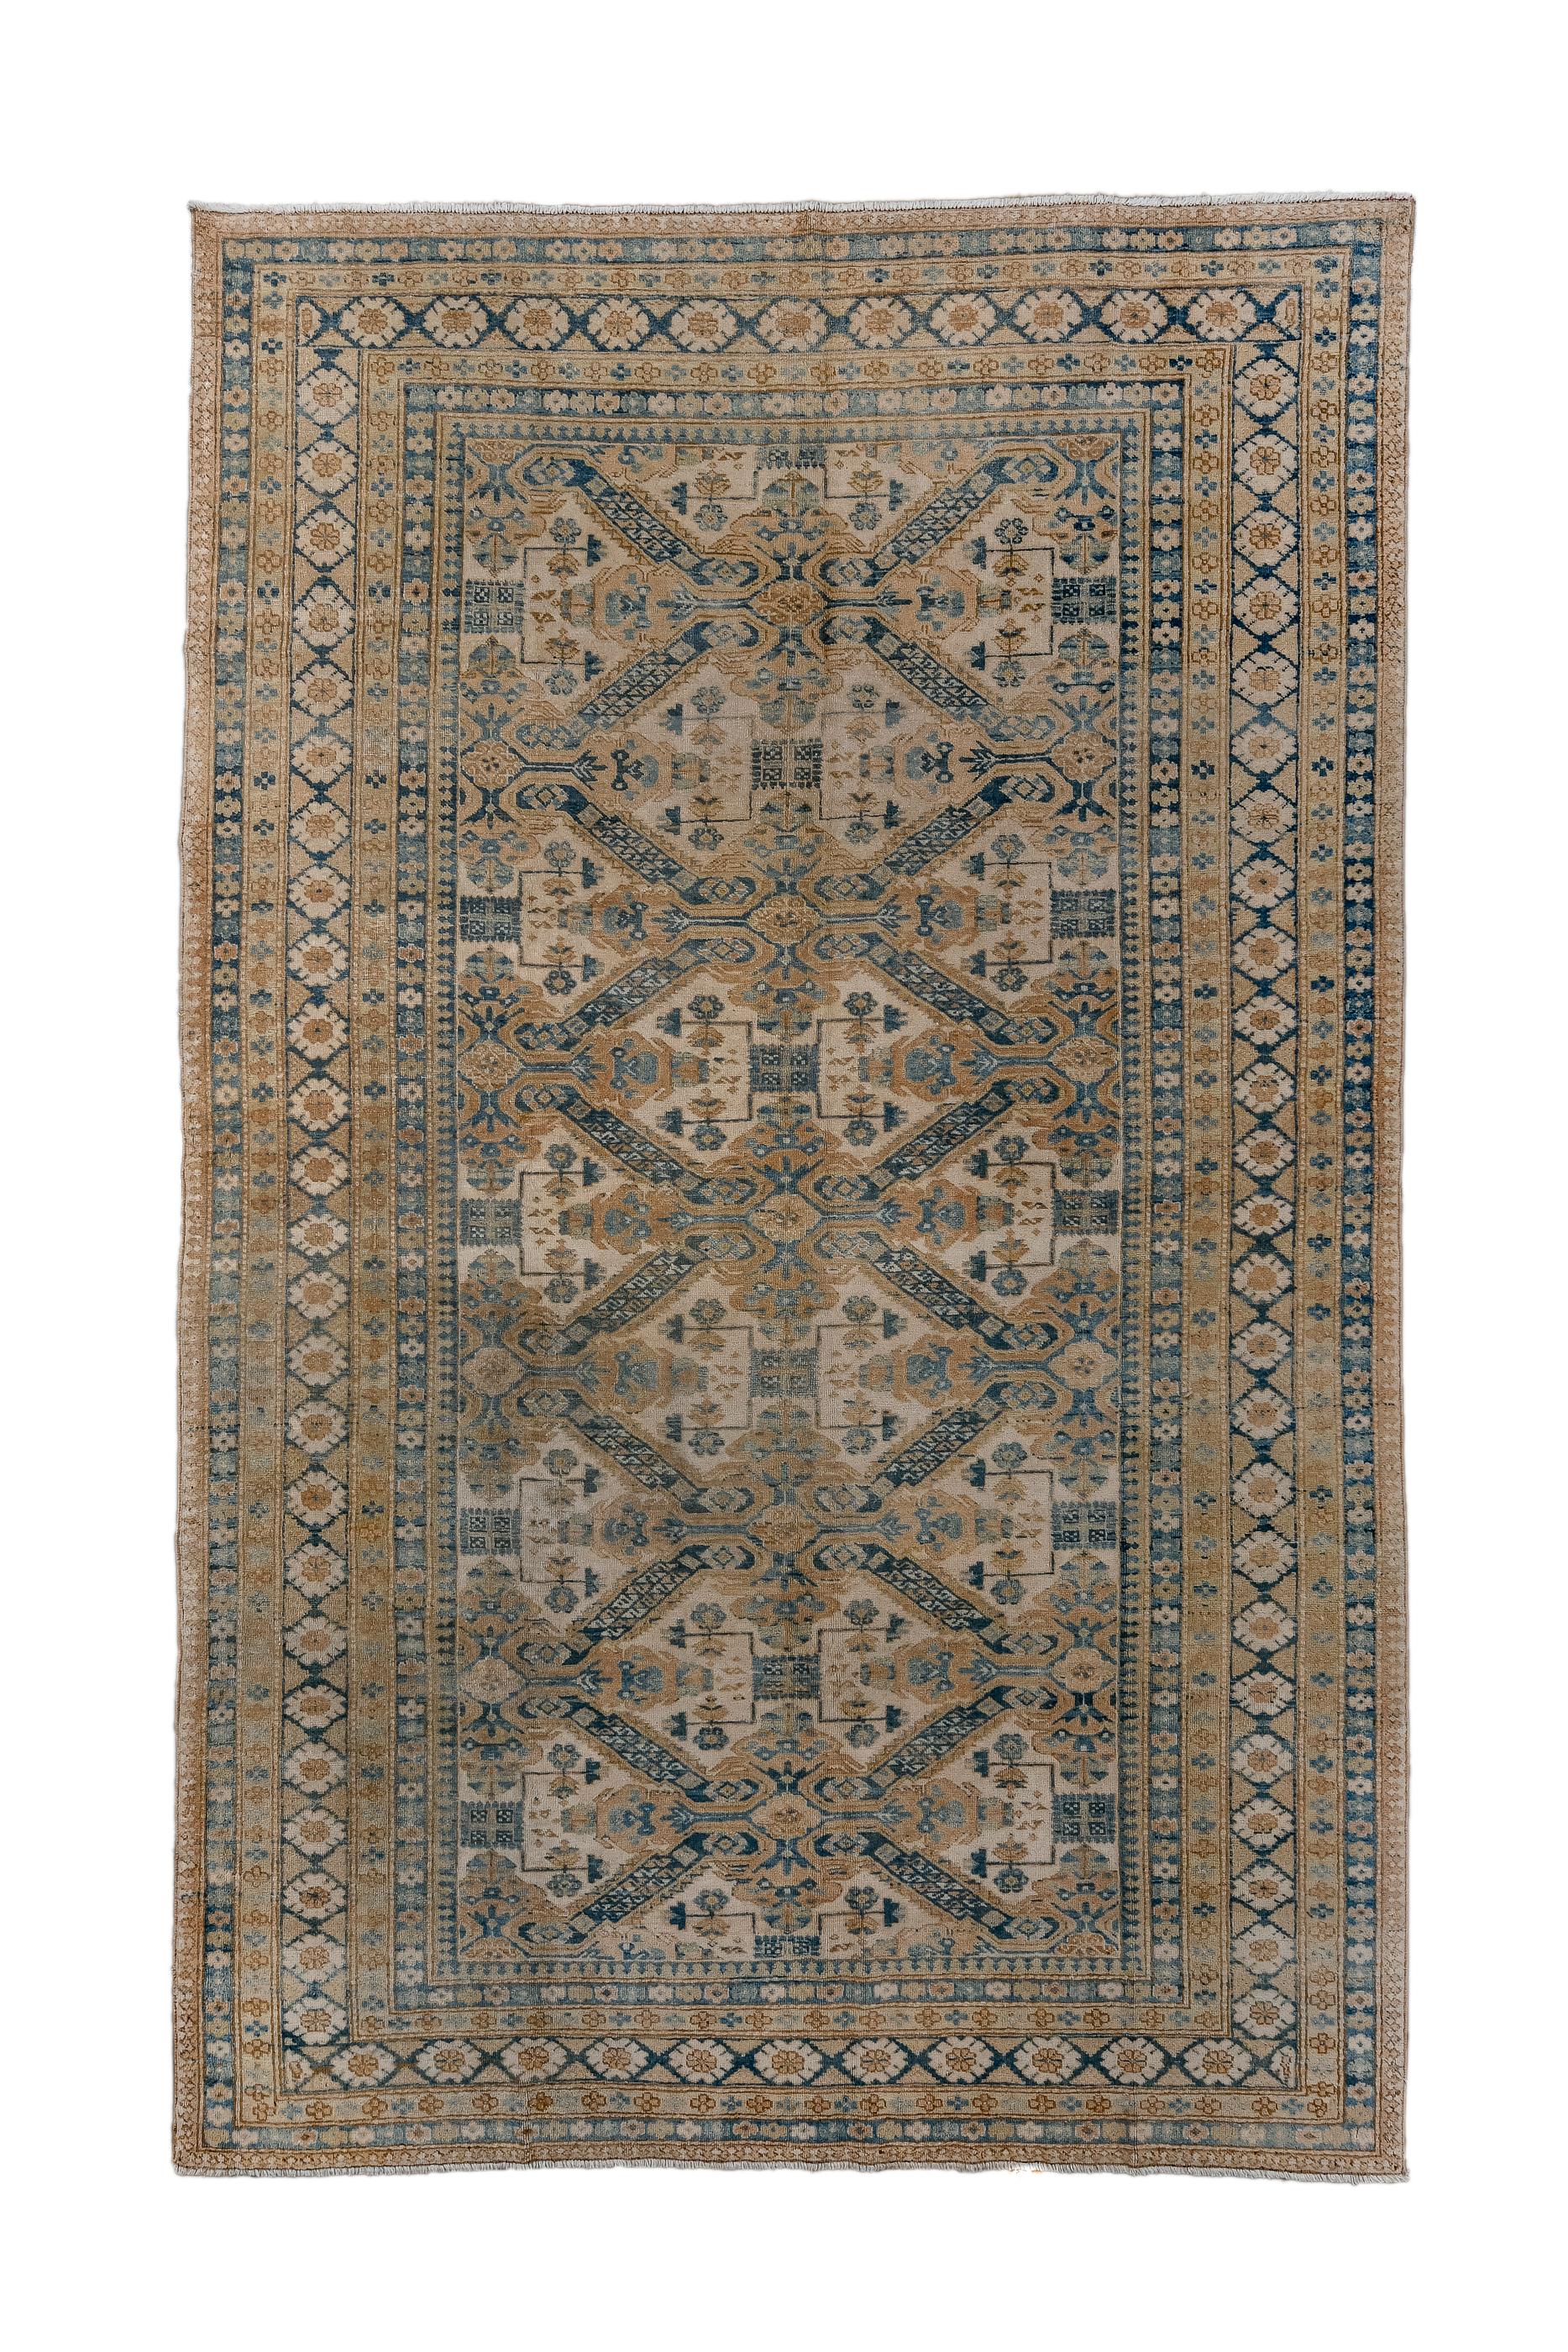 Ardebil rugs are a post WWII innovation, employing Caucasian designs, especially, as here, those of Kuba and Shirvan, but of Persian origin and facture. The sandy straw field shows a St. Andrews Cross Zeychur design.  The main royal blue border